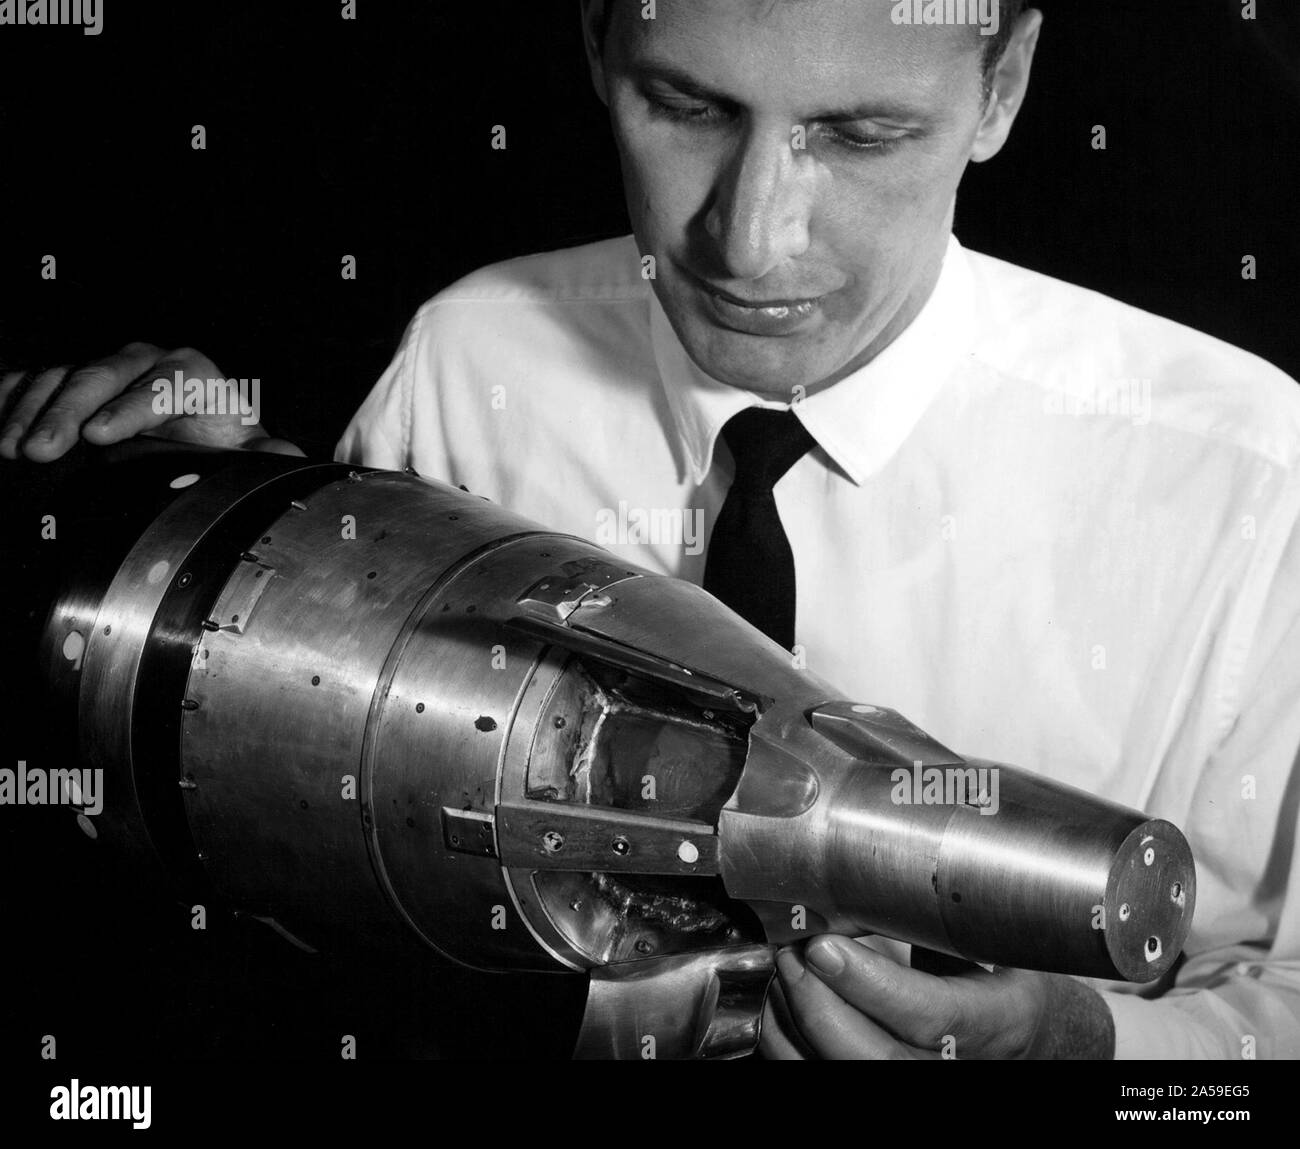 A researcher at the National Aeronautics and Space Administration (NASA) Lewis Research Center examines a small-scale model of the Gemini capsule in the 10- by 10-Foot Supersonic Wind Tunnel test section. Stock Photo